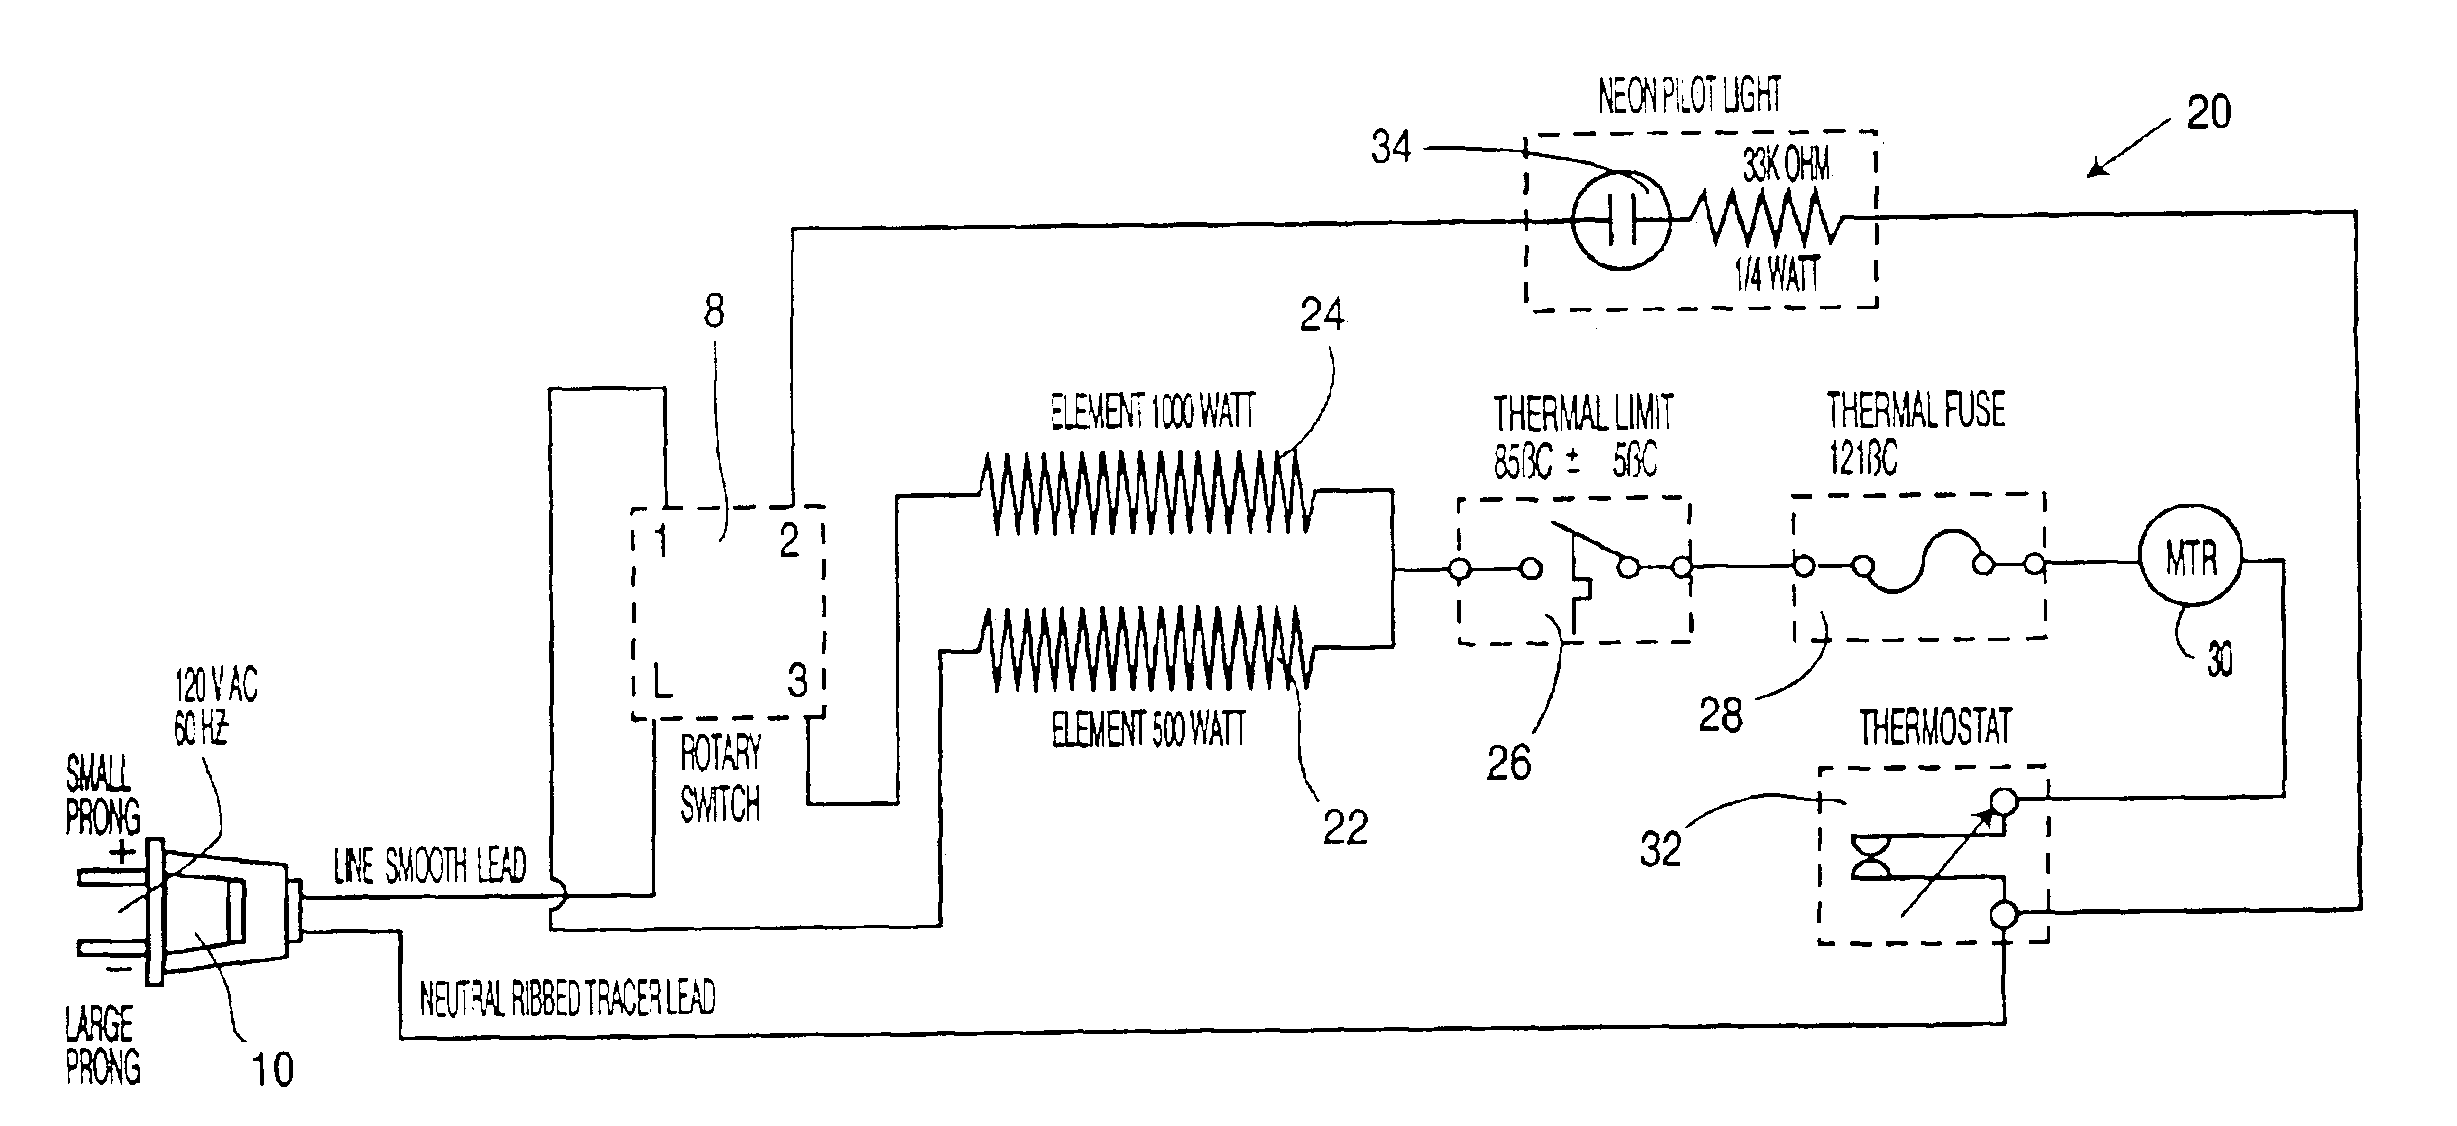 Electric circuit for portable heater